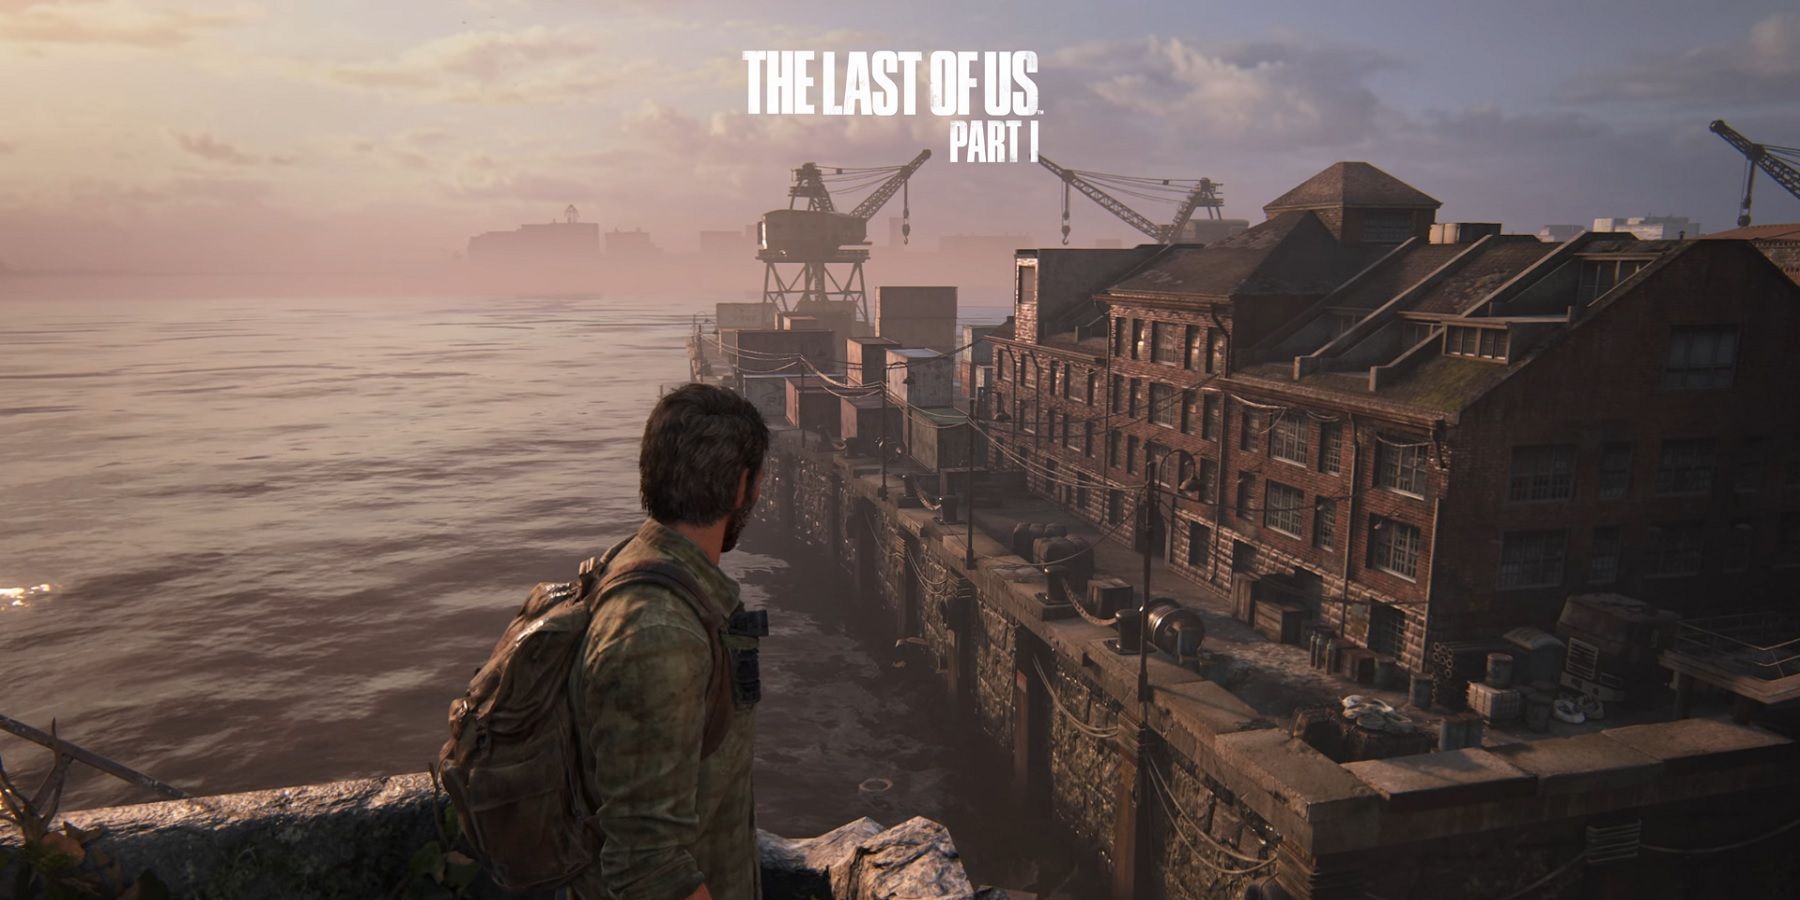 An image from The Last of Us remake showing Joel looking out onto the docks.